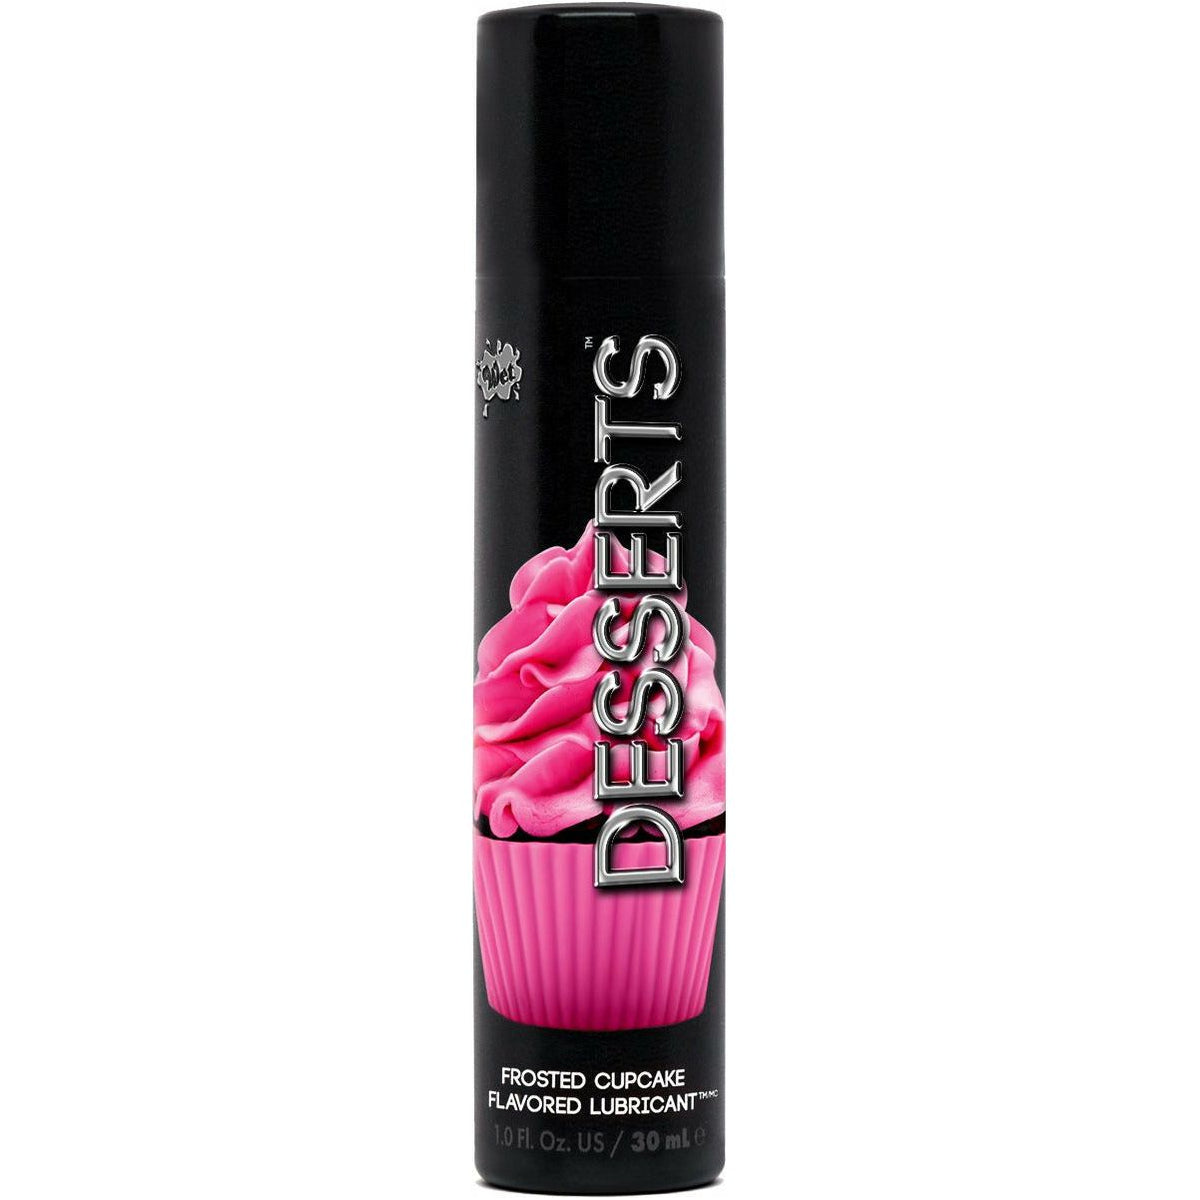 Wet Desserts - Flavoured Lubricant - 1.0 oz - Frosted Cupcake